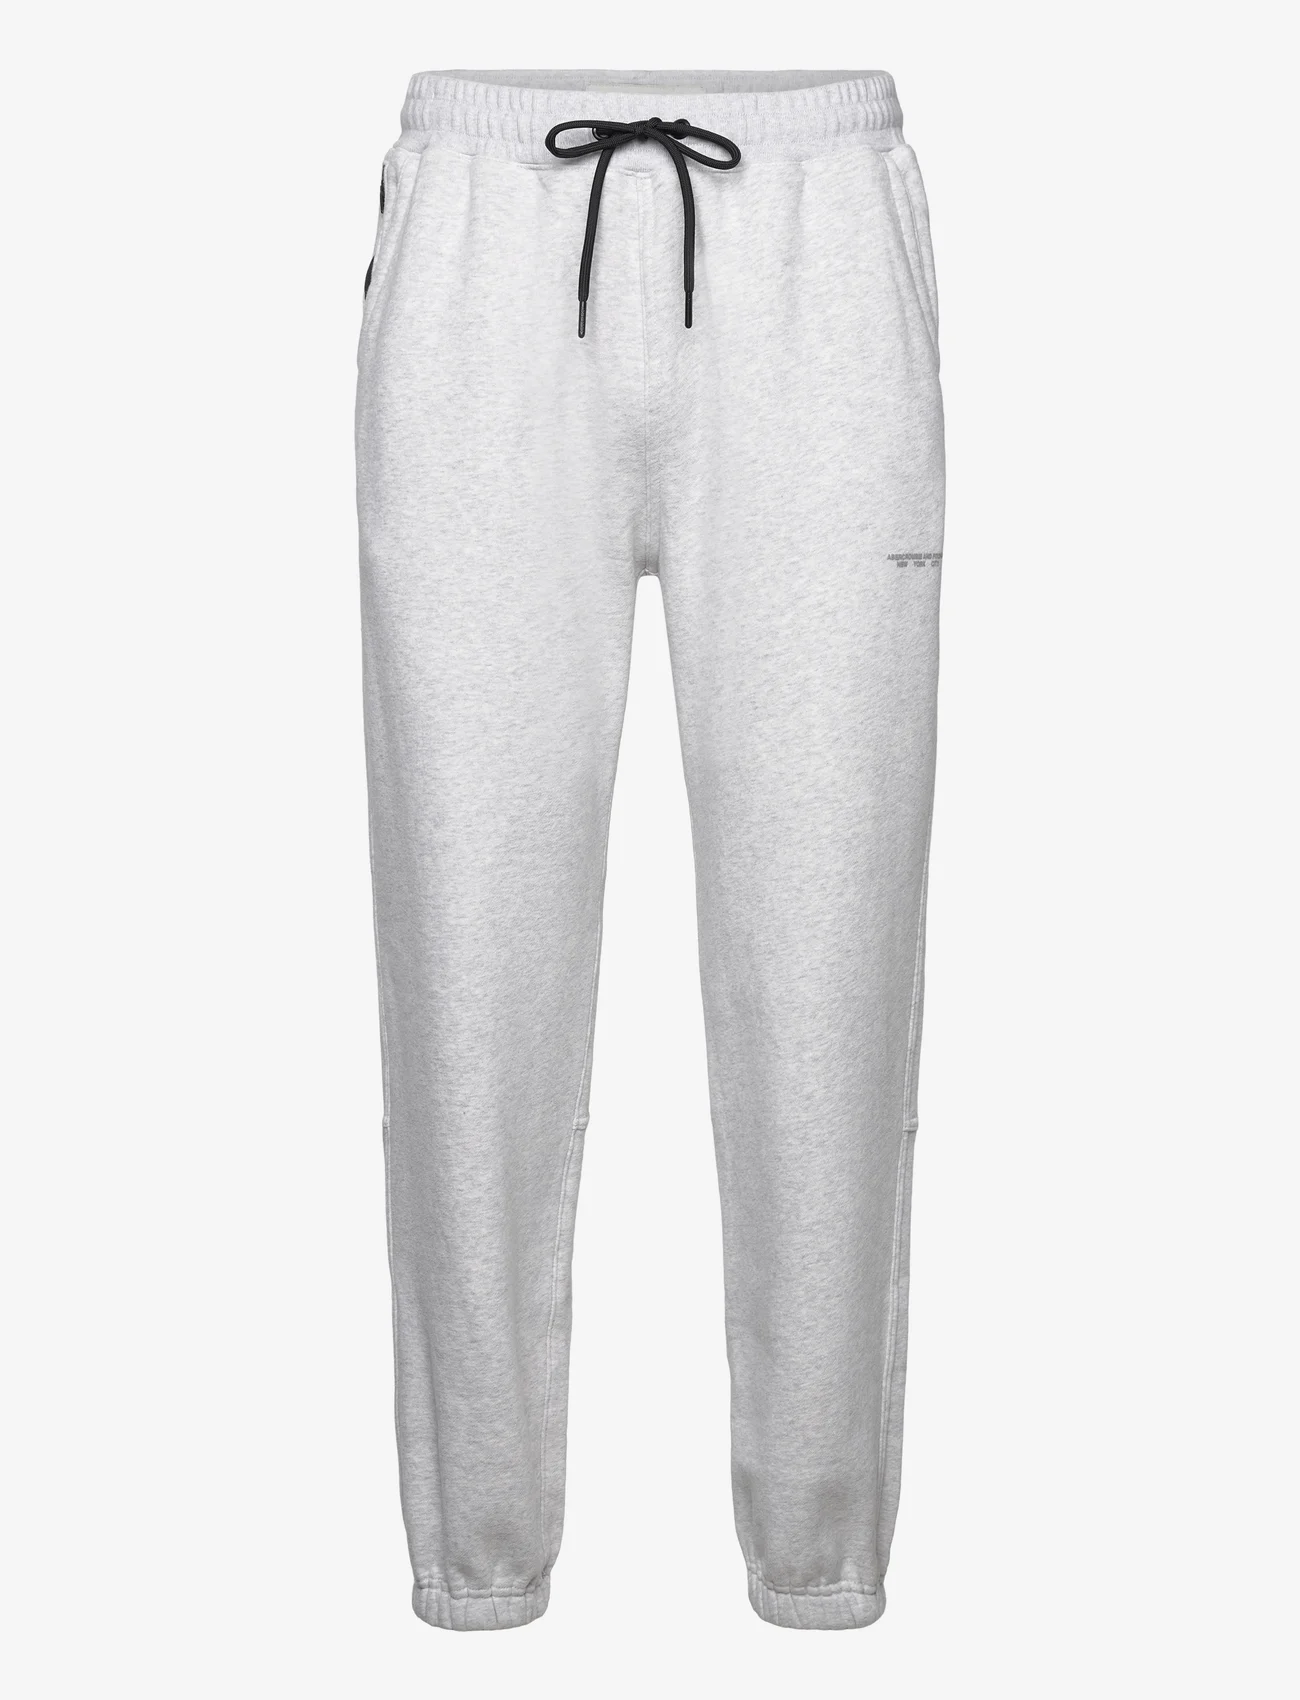 Abercrombie & Fitch - ANF MENS SWEATPANTS - sweatpants - grey heather - 0